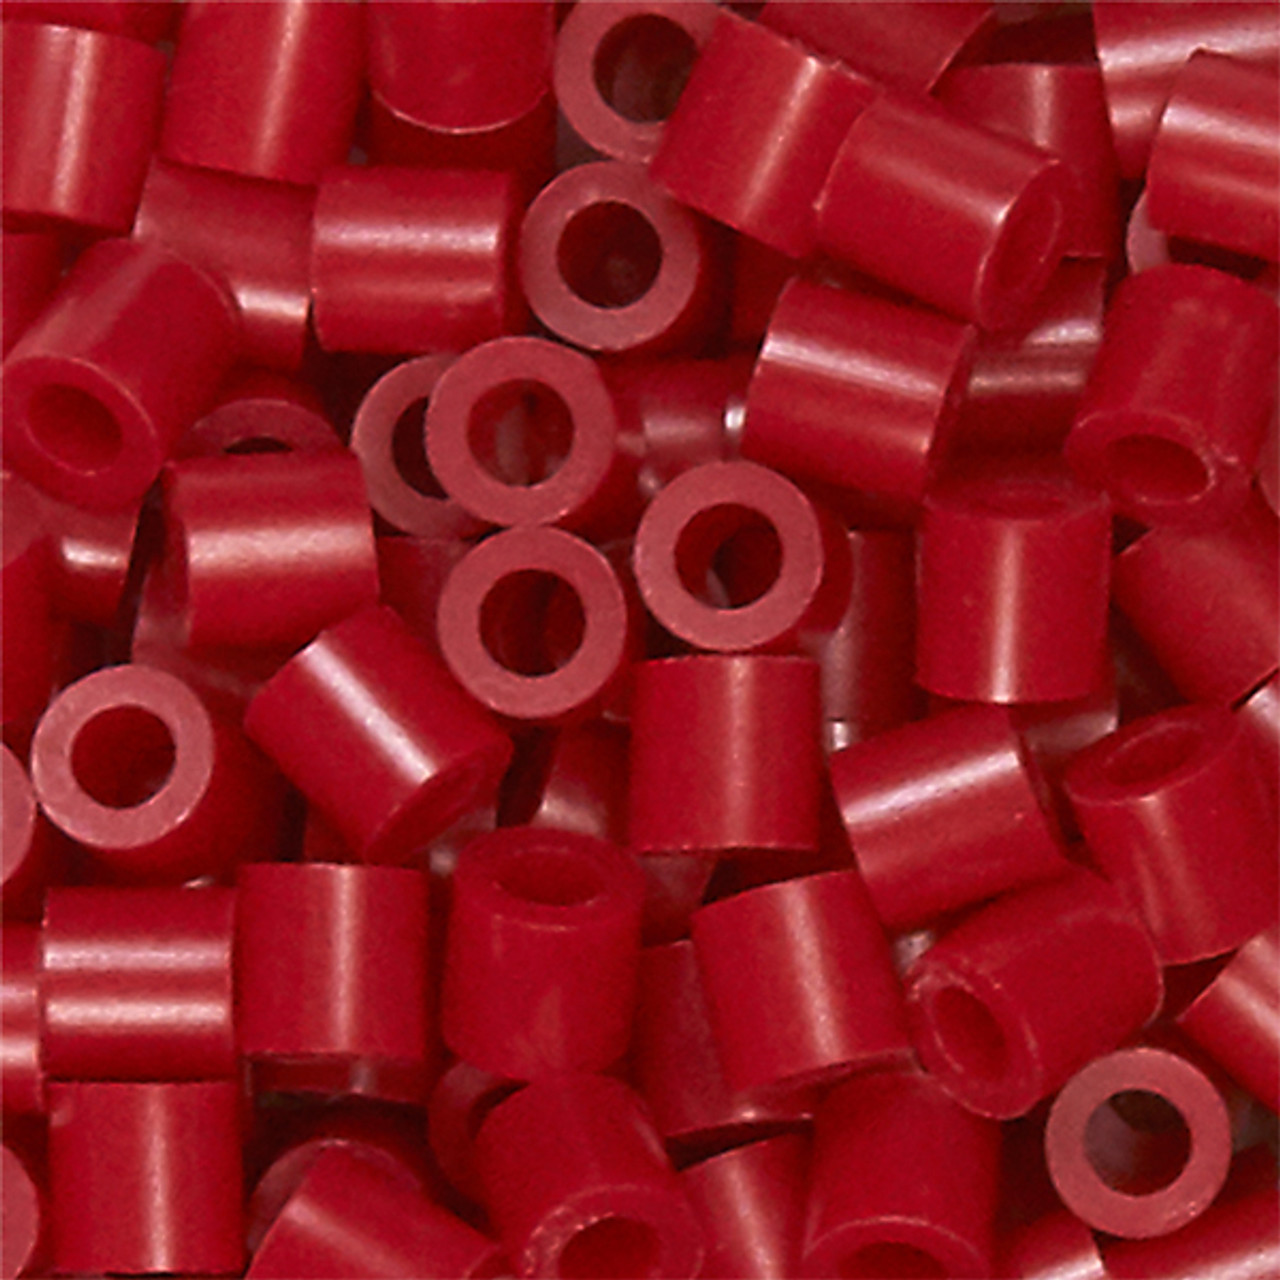  Perler Beads Fuse Beads for Crafts, 1000pcs, Cherry